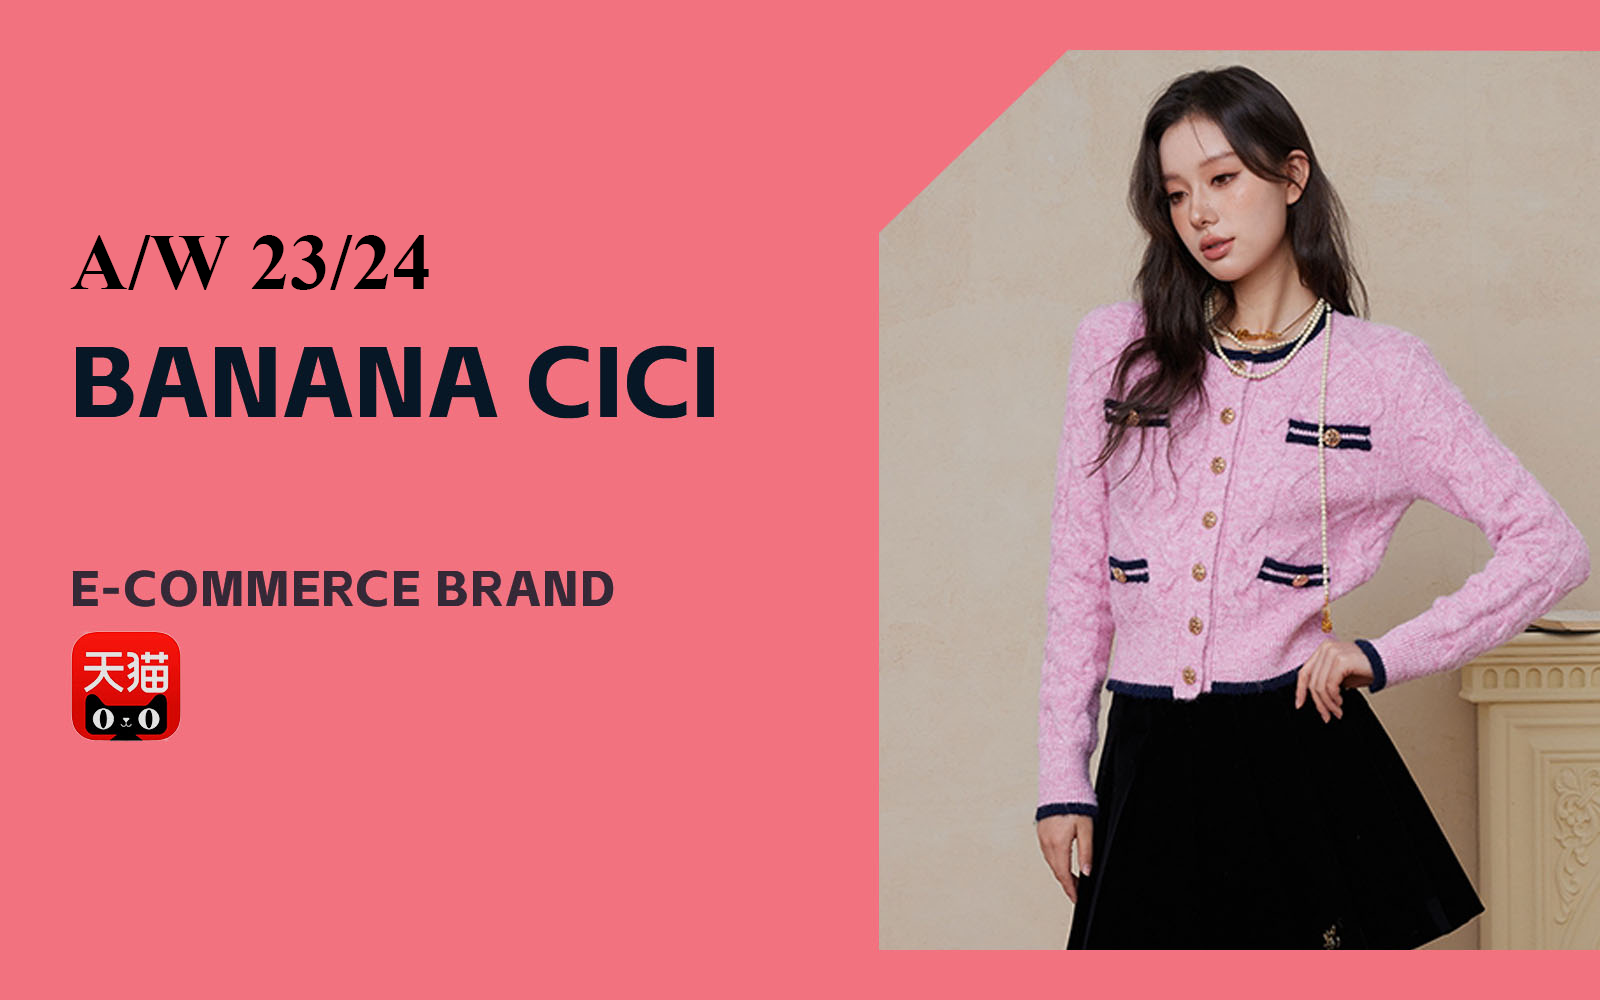 The Analysis of Banana CiCi The E-Commerce Women's Knitwear Brand